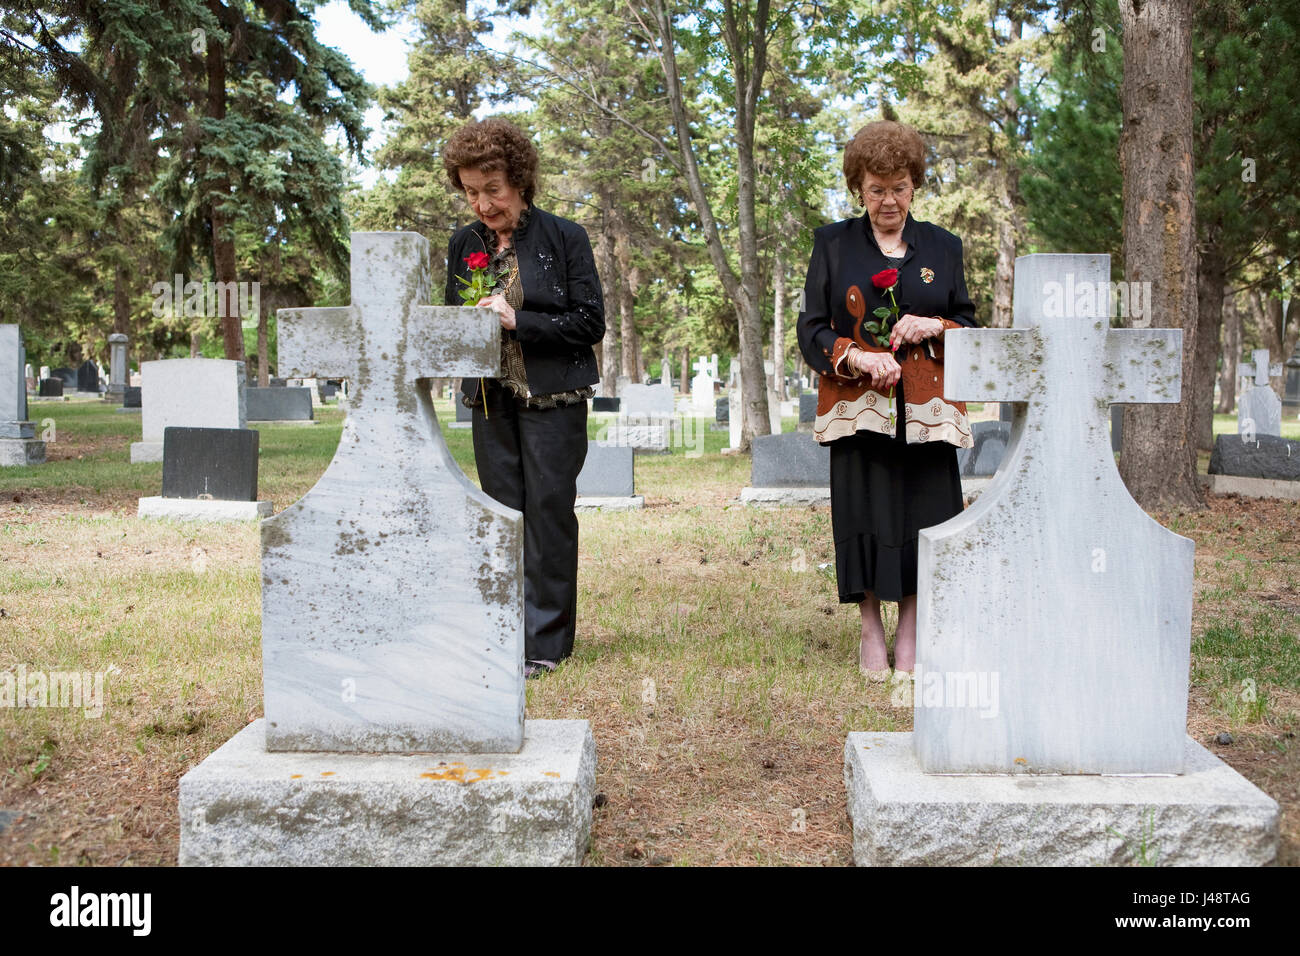 Two Women Holding Single Red Roses Standing At Two Graves Side By Side In A Cemetery; Edmonton, Alberta, Canada Stock Photo